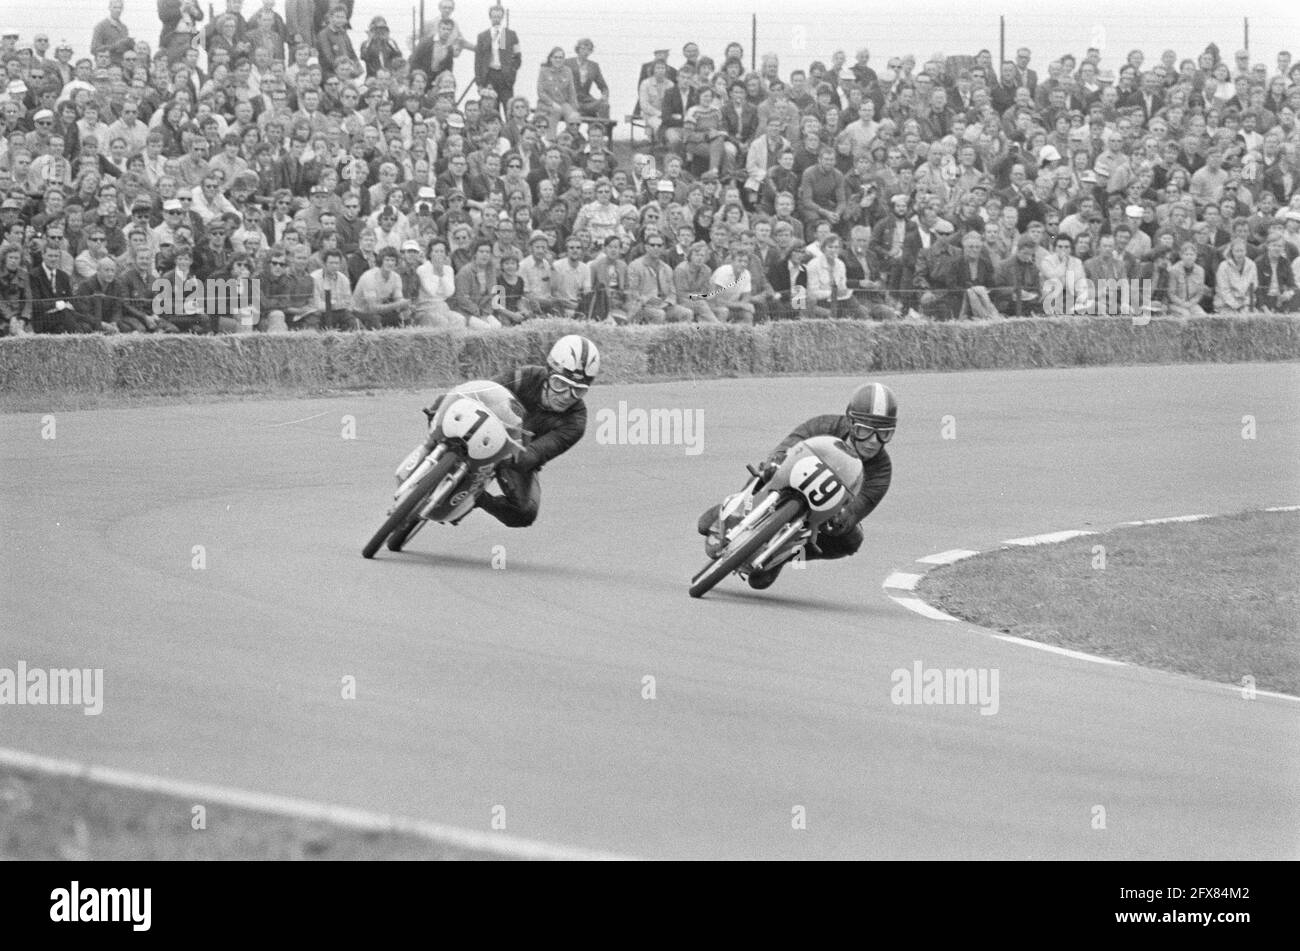 Angel Nieto (l) and Jan de Vries (r) on 50cc in action, June 26, 1971, motorsports, The Netherlands, 20th century press agency photo, news to remember, documentary, historic photography 1945-1990, visual stories, human history of the Twentieth Century, capturing moments in time Stock Photo